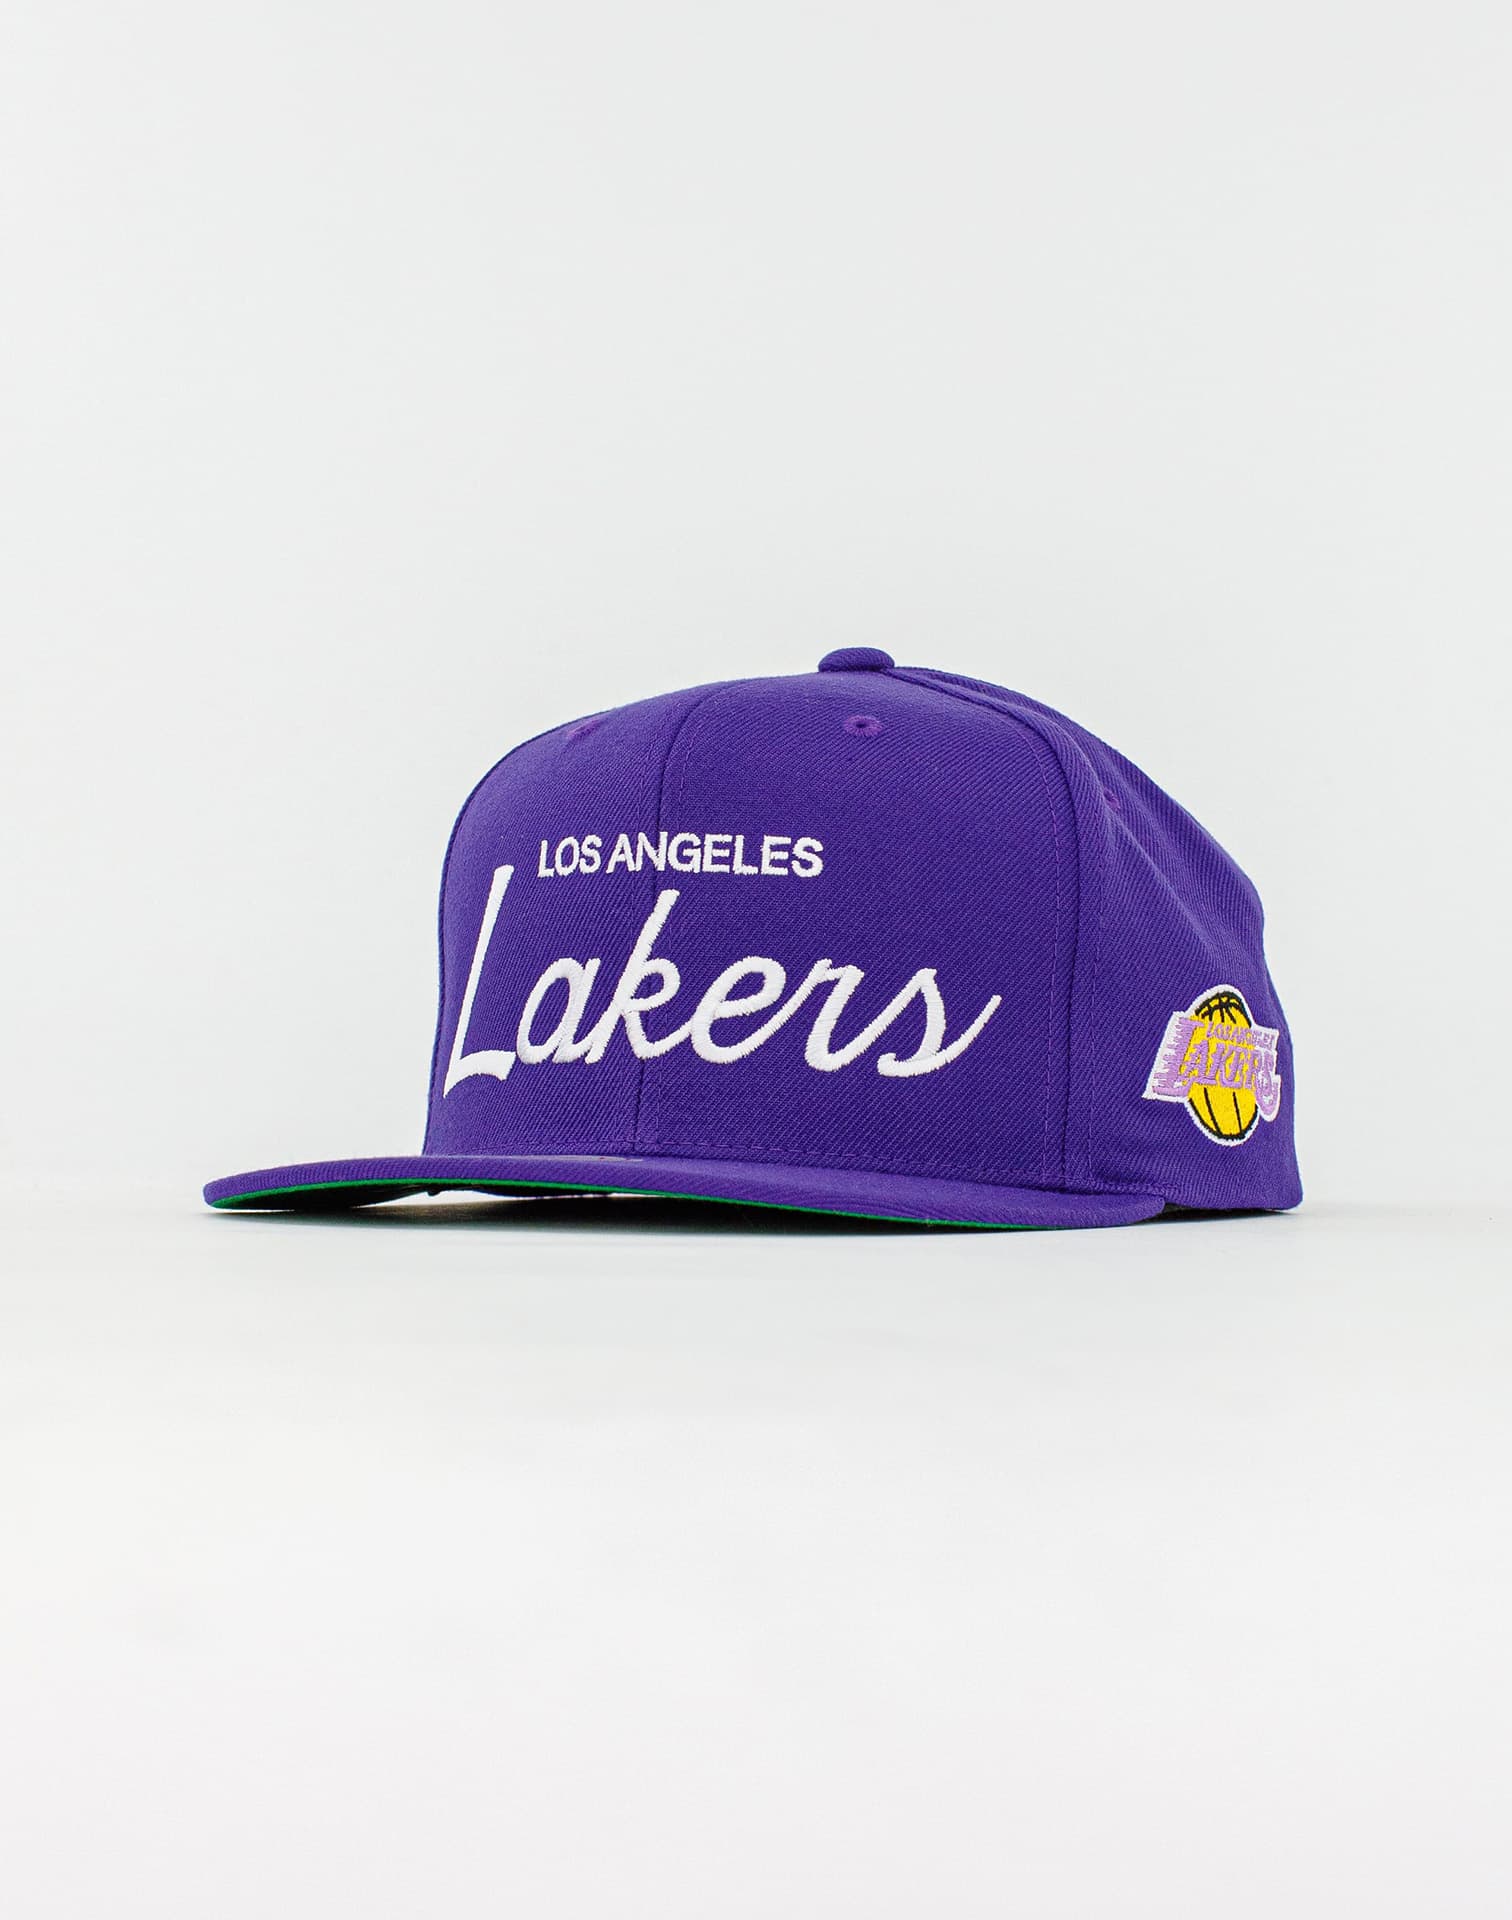 Mitchell & Ness NBA CHICAGO BULLS '96 CHAMPIONS WAVE PRO CROWN SNAPBAC –  DTLR